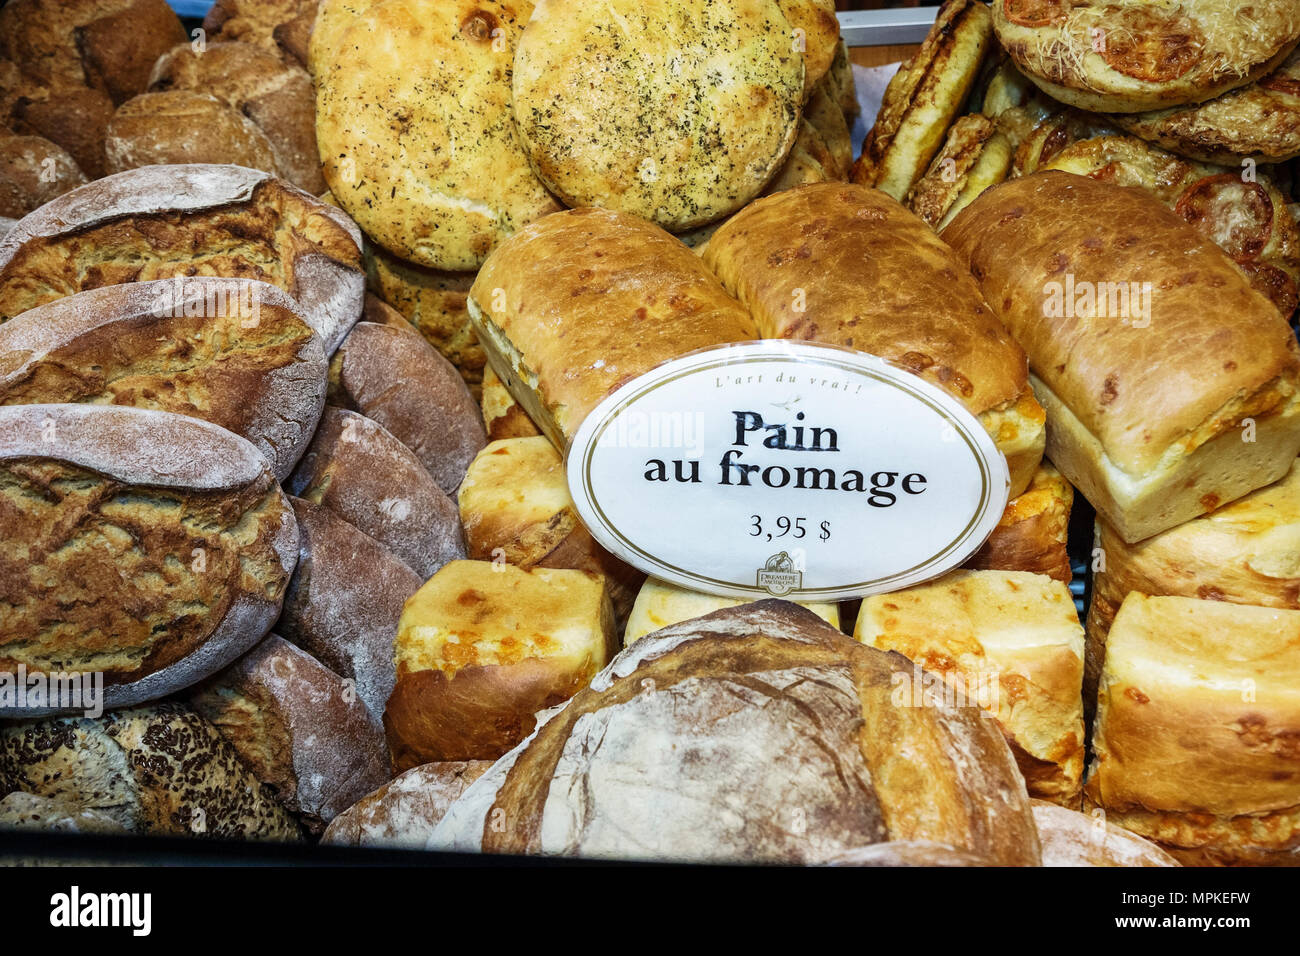 Montreal Canada,Quebec Province,Atwater Market,rue Saint Ambroise,Boulangerie Premiere Moisson,bakery,bread with cheese,Canada070704011 Stock Photo